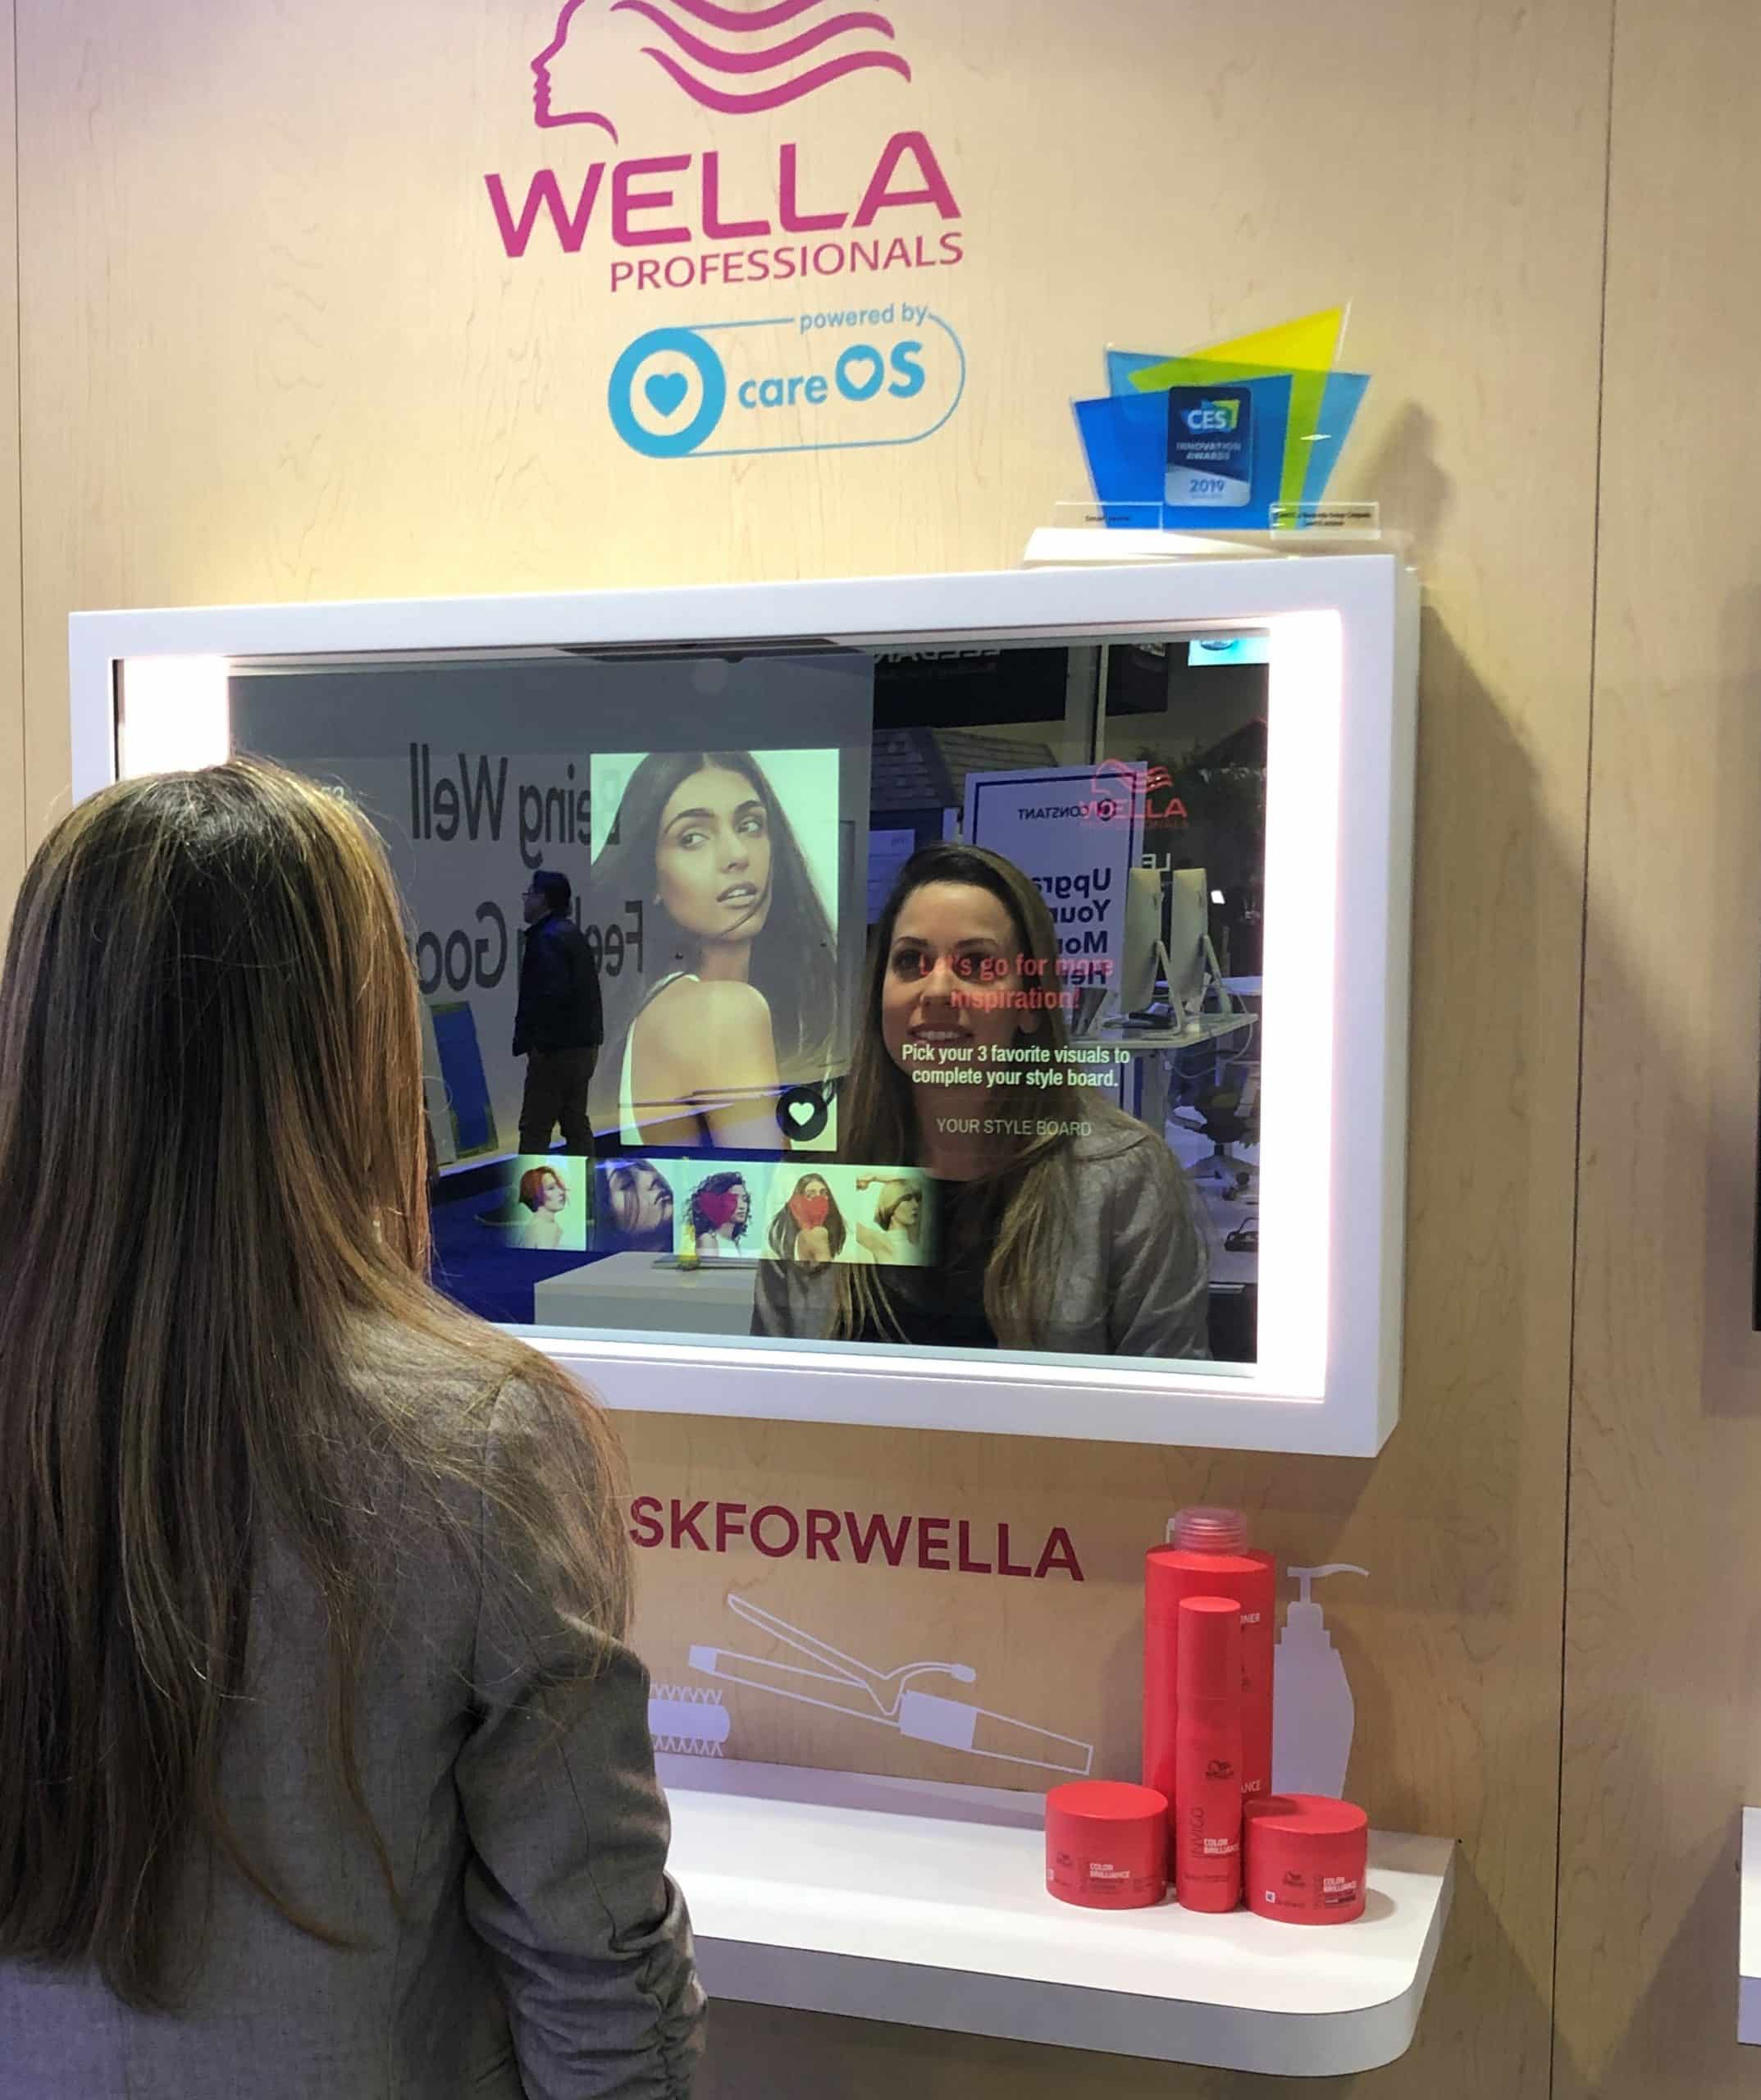 IMG SMART MIRROR WELLA PROFESSIONALS 4 scaled